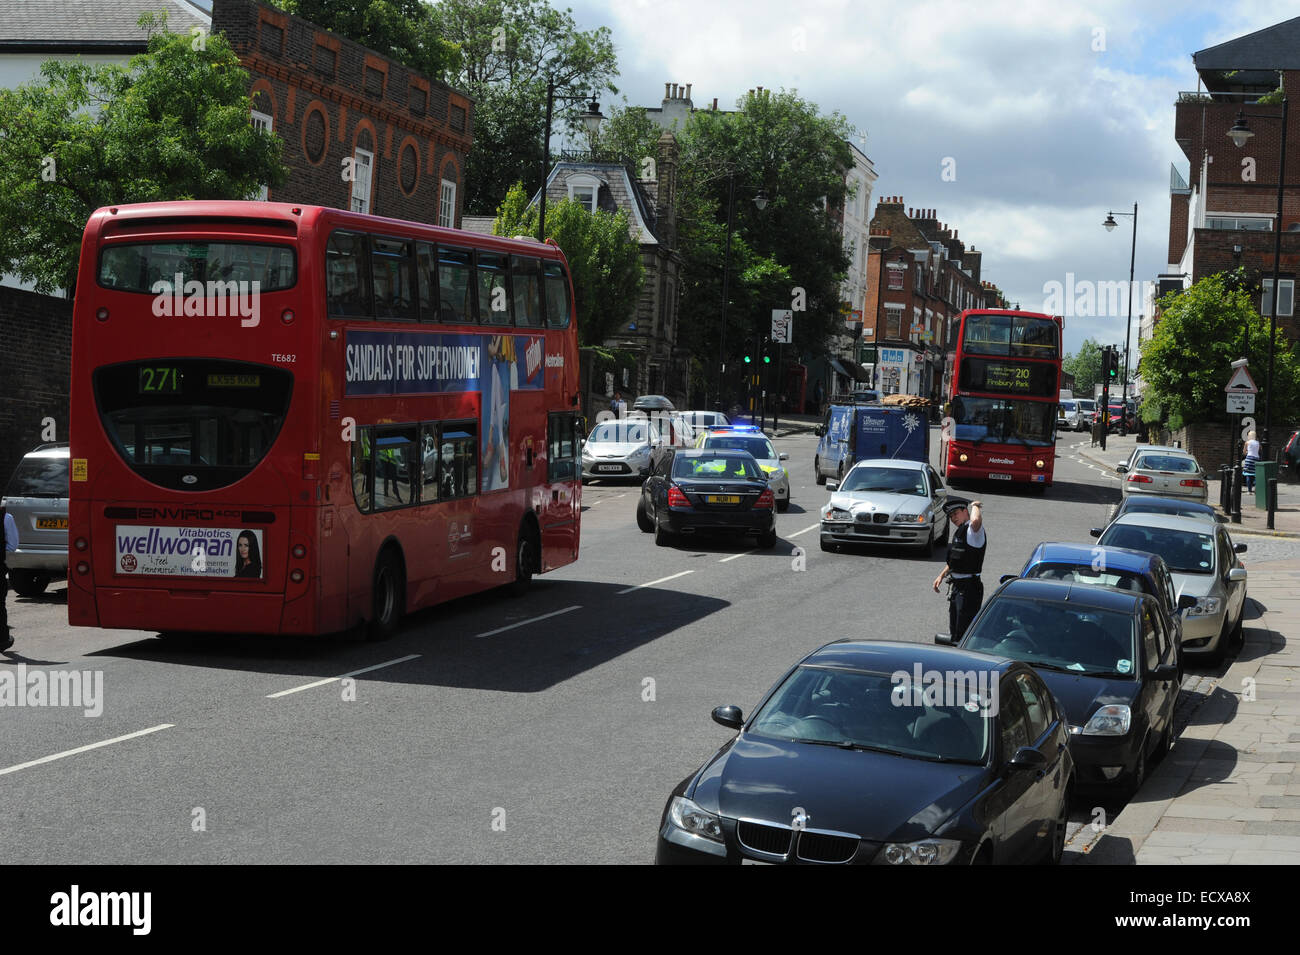 Two cars collide during afternoon traffic on Highgate Hill in North London  Where: London, United Kingdom When: 18 Jun 2014 Stock Photo